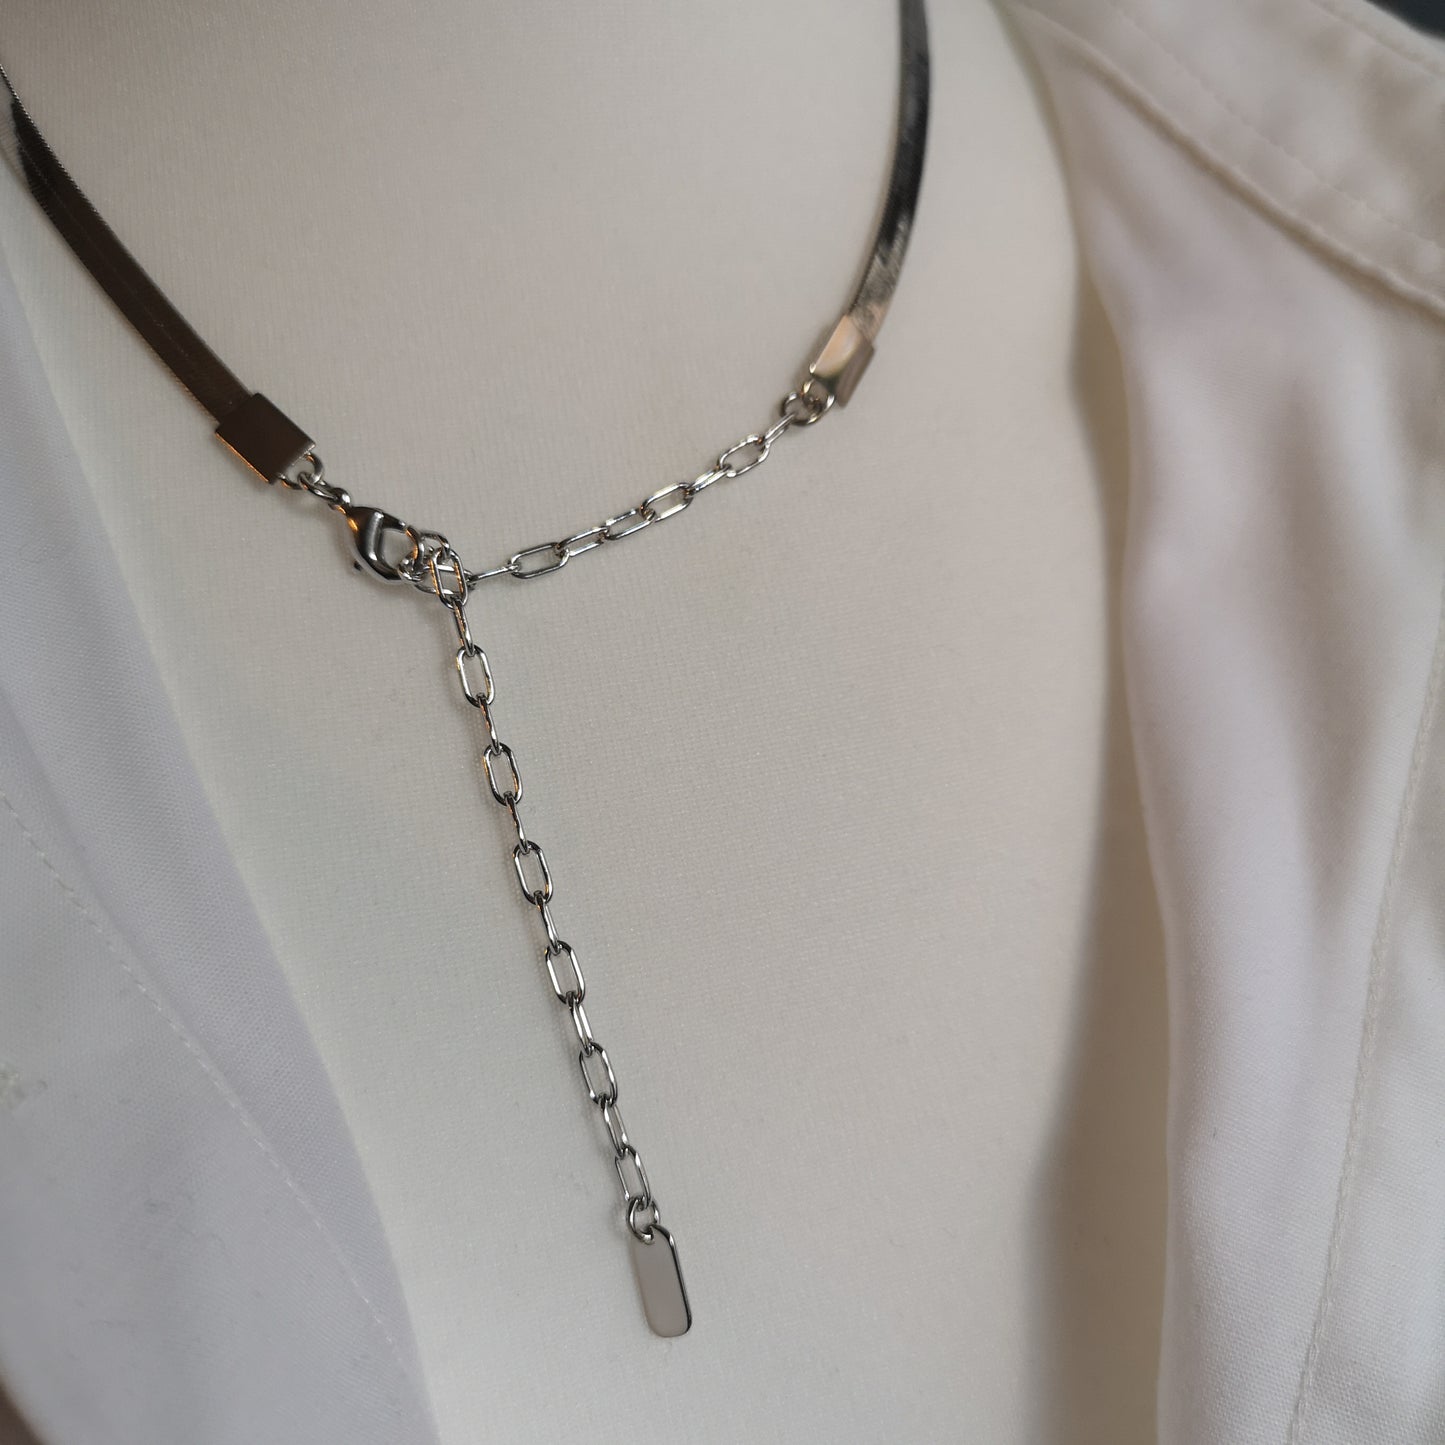 Shine, flat chain necklace